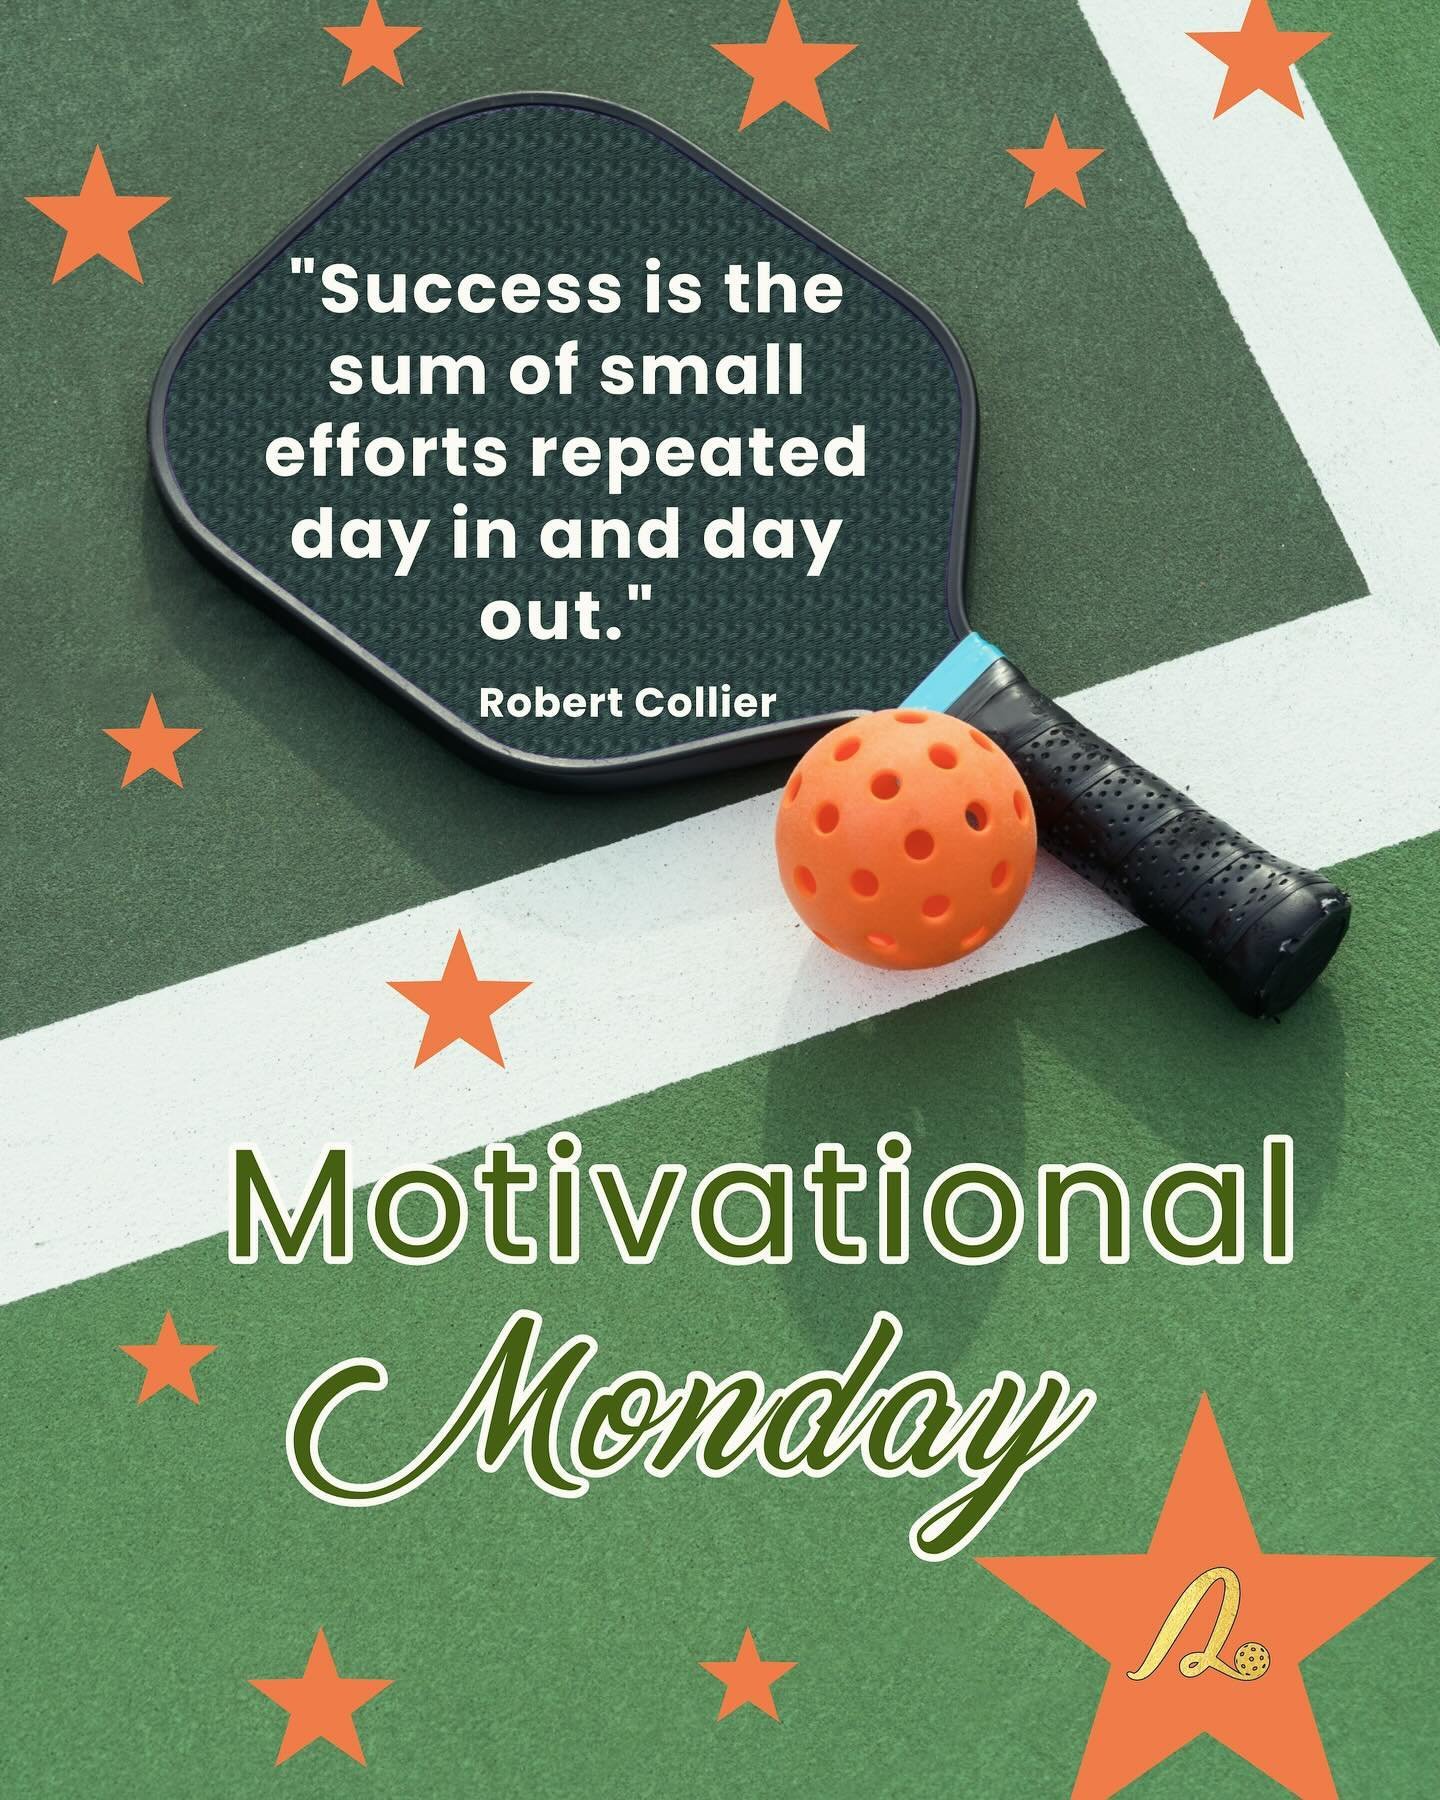 💥 Happy Monday, everyone! 💥

Monday is the start of a new week and a chance to refocus on our goals. Take a moment to think 🤔 about what truly motivates you during the week. Is it achieving a specific goal, staying connected with loved ones, or si